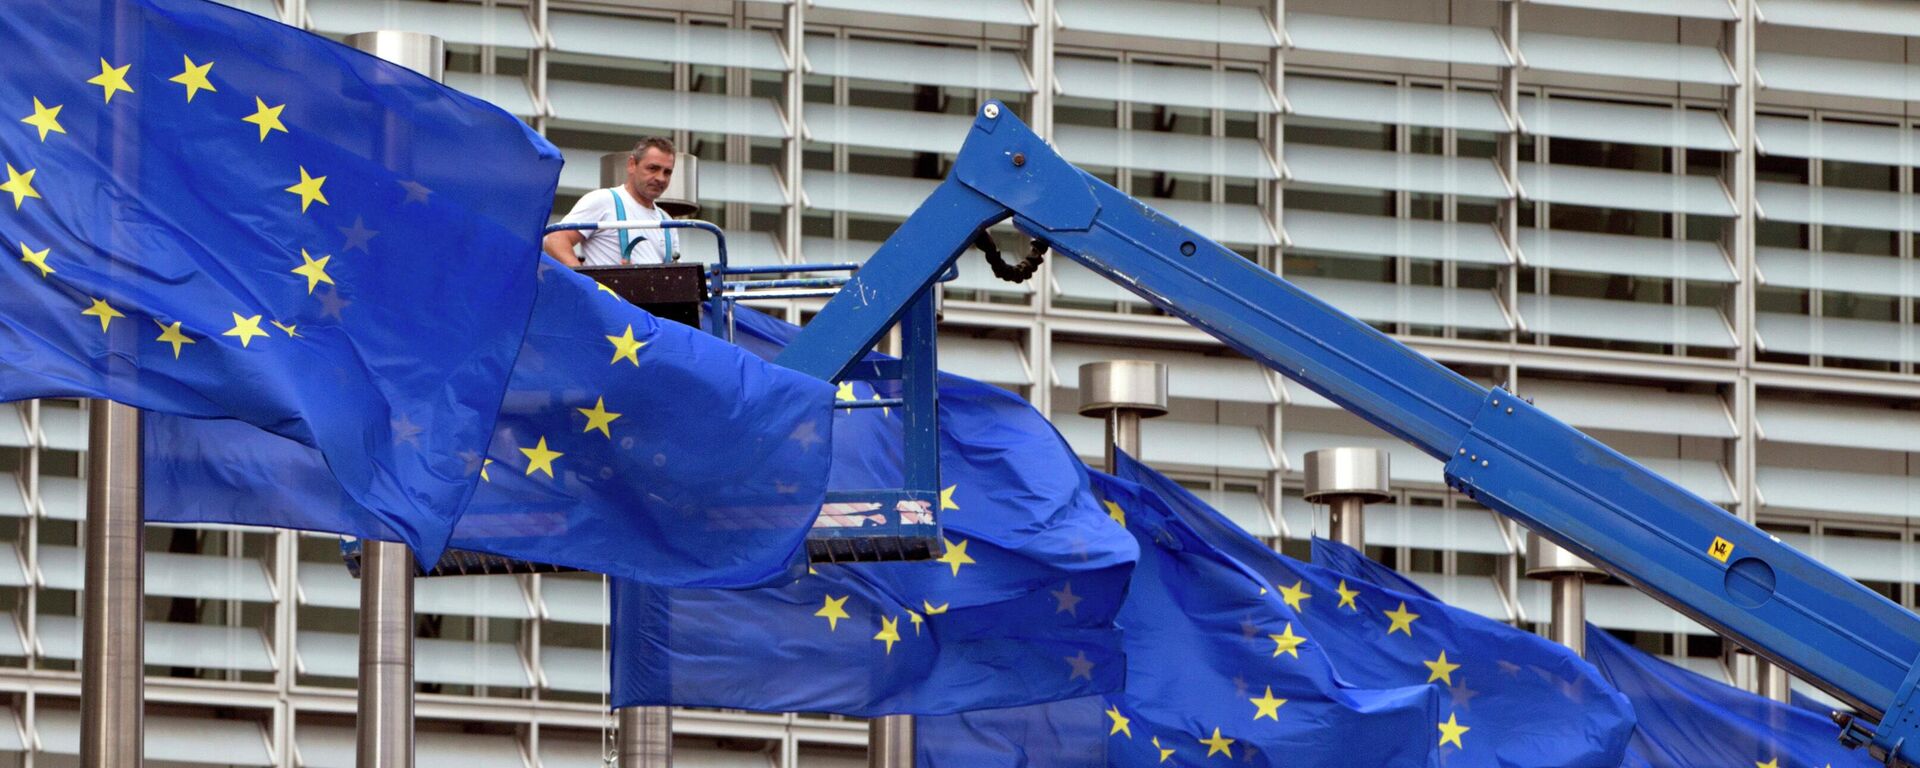 FILE- In this June 23, 2016 file photo, a worker on a lift adjusts the EU flags in front of EU headquarters in Brussels - Sputnik International, 1920, 11.11.2022